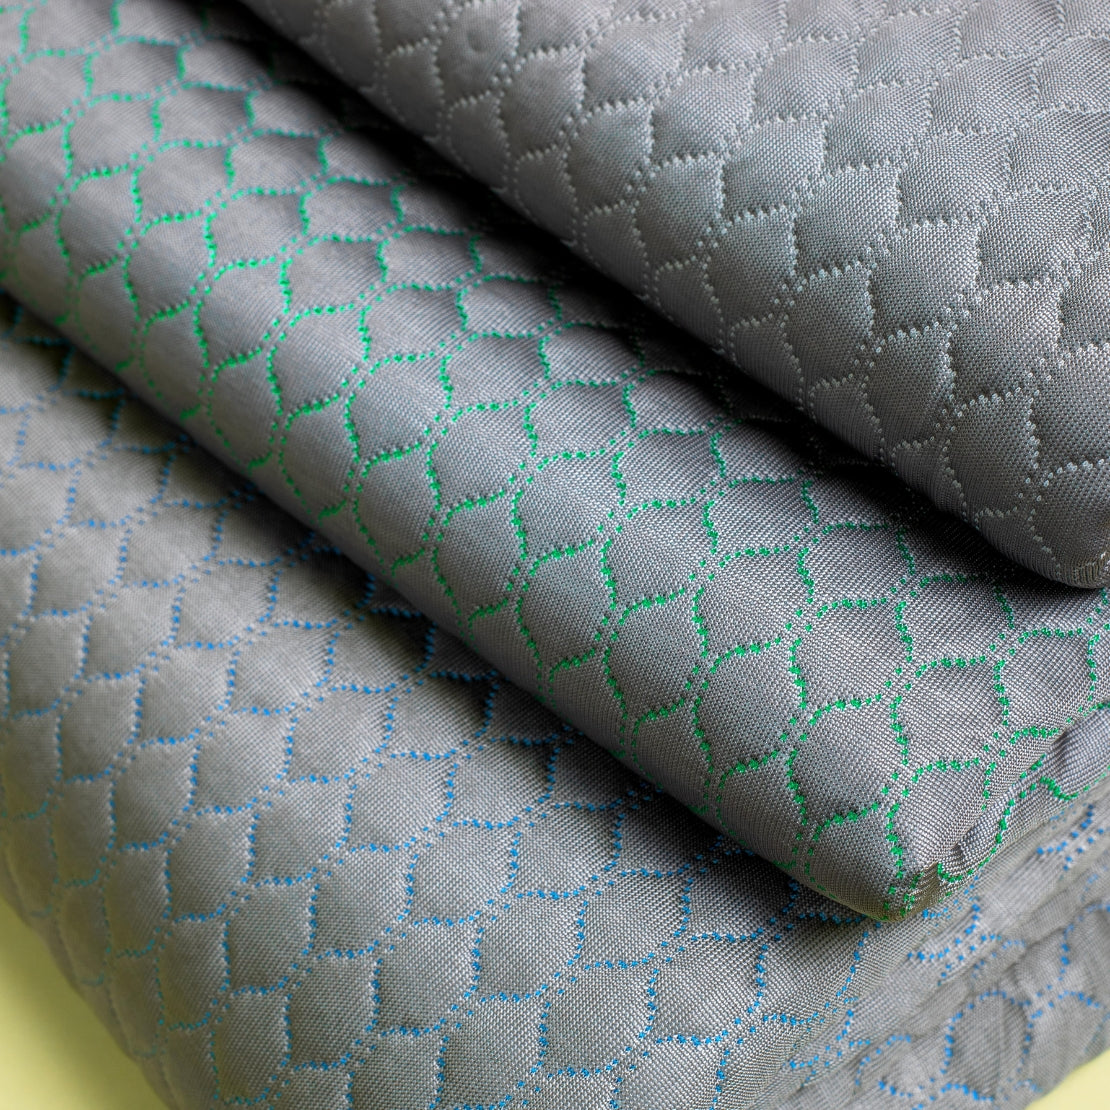 Close-up view of a textured blanket with intricate diamond-shaped patterns in shades of gray, highlighted by subtle green and blue stitching.